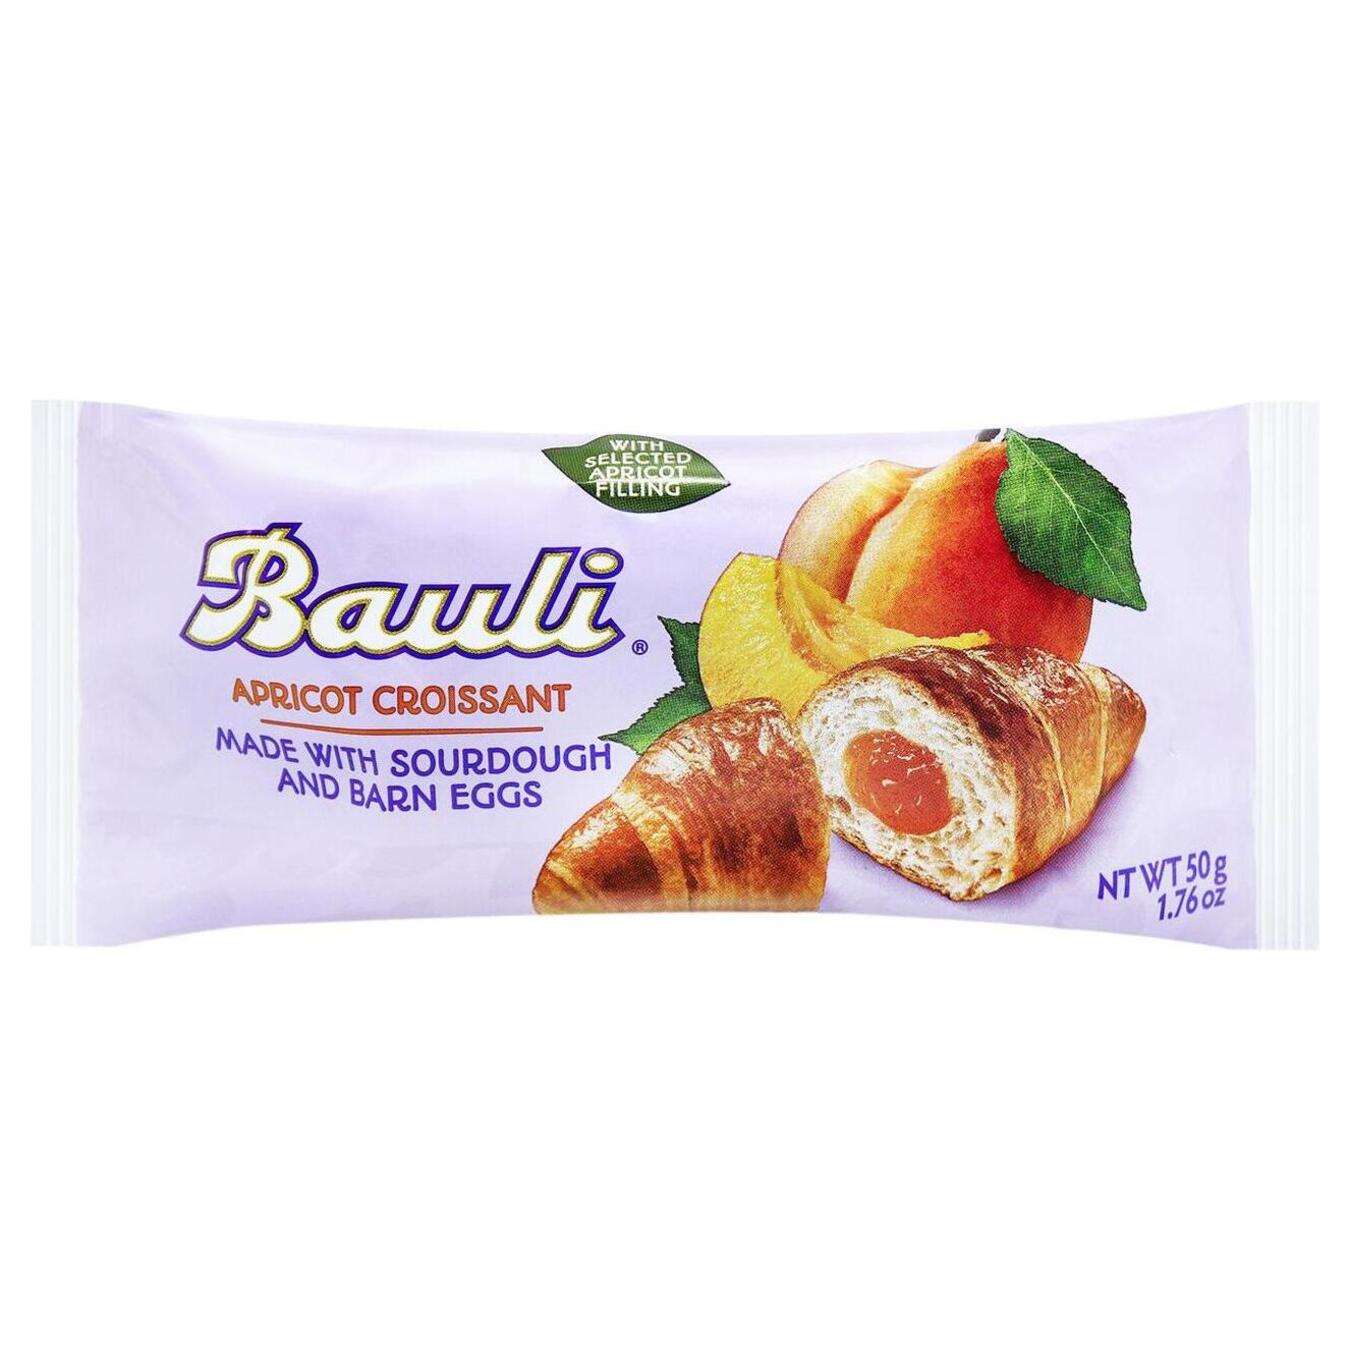 Bauli croissant with apricot filling 50g